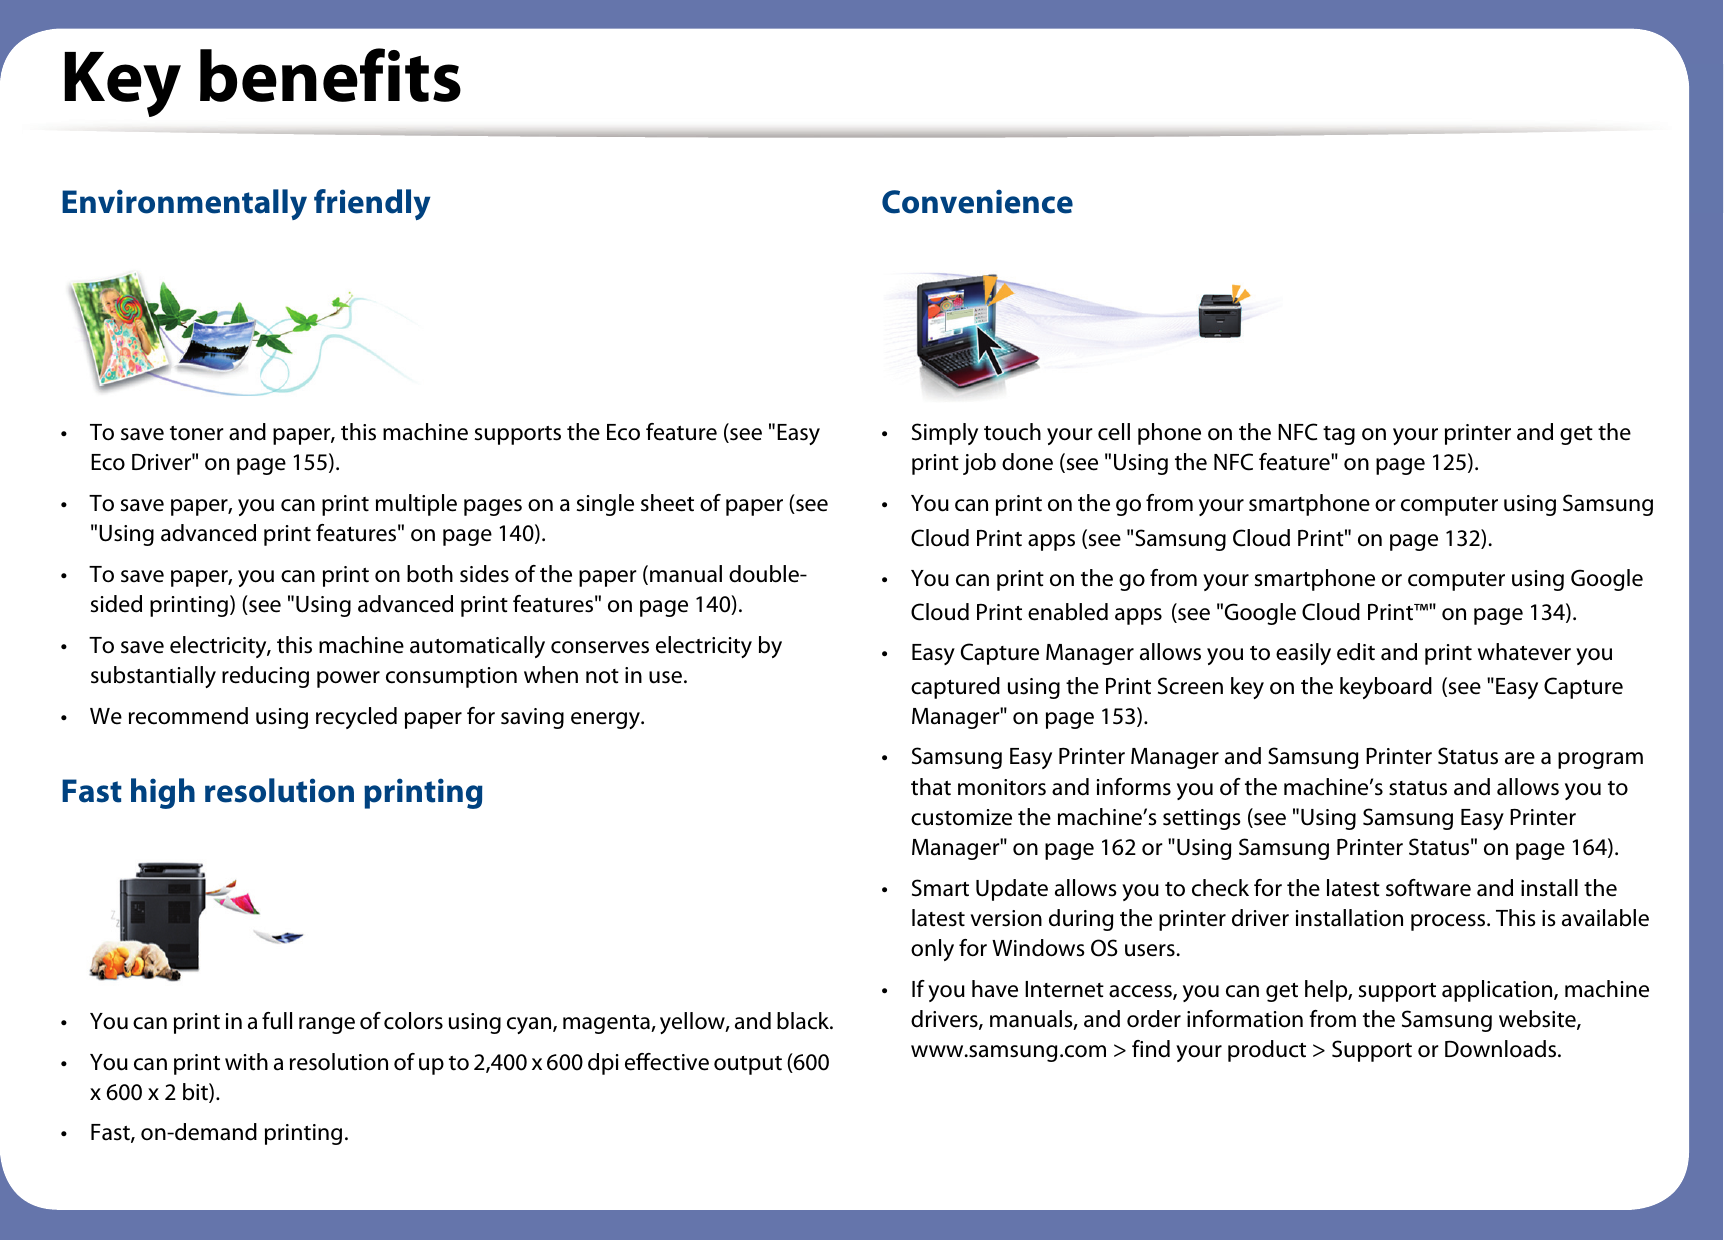 Key benefitsEnvironmentally friendly• To save toner and paper, this machine supports the Eco feature (see &quot;Easy Eco Driver&quot; on page 155).• To save paper, you can print multiple pages on a single sheet of paper (see &quot;Using advanced print features&quot; on page 140).• To save paper, you can print on both sides of the paper (manual double-sided printing) (see &quot;Using advanced print features&quot; on page 140).• To save electricity, this machine automatically conserves electricity by substantially reducing power consumption when not in use.• We recommend using recycled paper for saving energy.Fast high resolution printing• You can print in a full range of colors using cyan, magenta, yellow, and black.• You can print with a resolution of up to 2,400 x 600 dpi effective output (600 x 600 x 2 bit).• Fast, on-demand printing.Convenience• Simply touch your cell phone on the NFC tag on your printer and get the print job done (see &quot;Using the NFC feature&quot; on page 125). • You can print on the go from your smartphone or computer using SamsungCloud Print apps (see &quot;Samsung Cloud Print&quot; on page 132).• You can print on the go from your smartphone or computer using Google Cloud Print enabled apps (see &quot;Google Cloud Print™&quot; on page 134).• Easy Capture Manager allows you to easily edit and print whatever you captured using the Print Screen key on the keyboard (see &quot;Easy Capture Manager&quot; on page 153).• Samsung Easy Printer Manager and Samsung Printer Status are a program that monitors and informs you of the machine’s status and allows you to customize the machine’s settings (see &quot;Using Samsung Easy Printer Manager&quot; on page 162 or &quot;Using Samsung Printer Status&quot; on page 164).• Smart Update allows you to check for the latest software and install the latest version during the printer driver installation process. This is available only for Windows OS users.• If you have Internet access, you can get help, support application, machine drivers, manuals, and order information from the Samsung website, www.samsung.com &gt; find your product &gt; Support or Downloads.